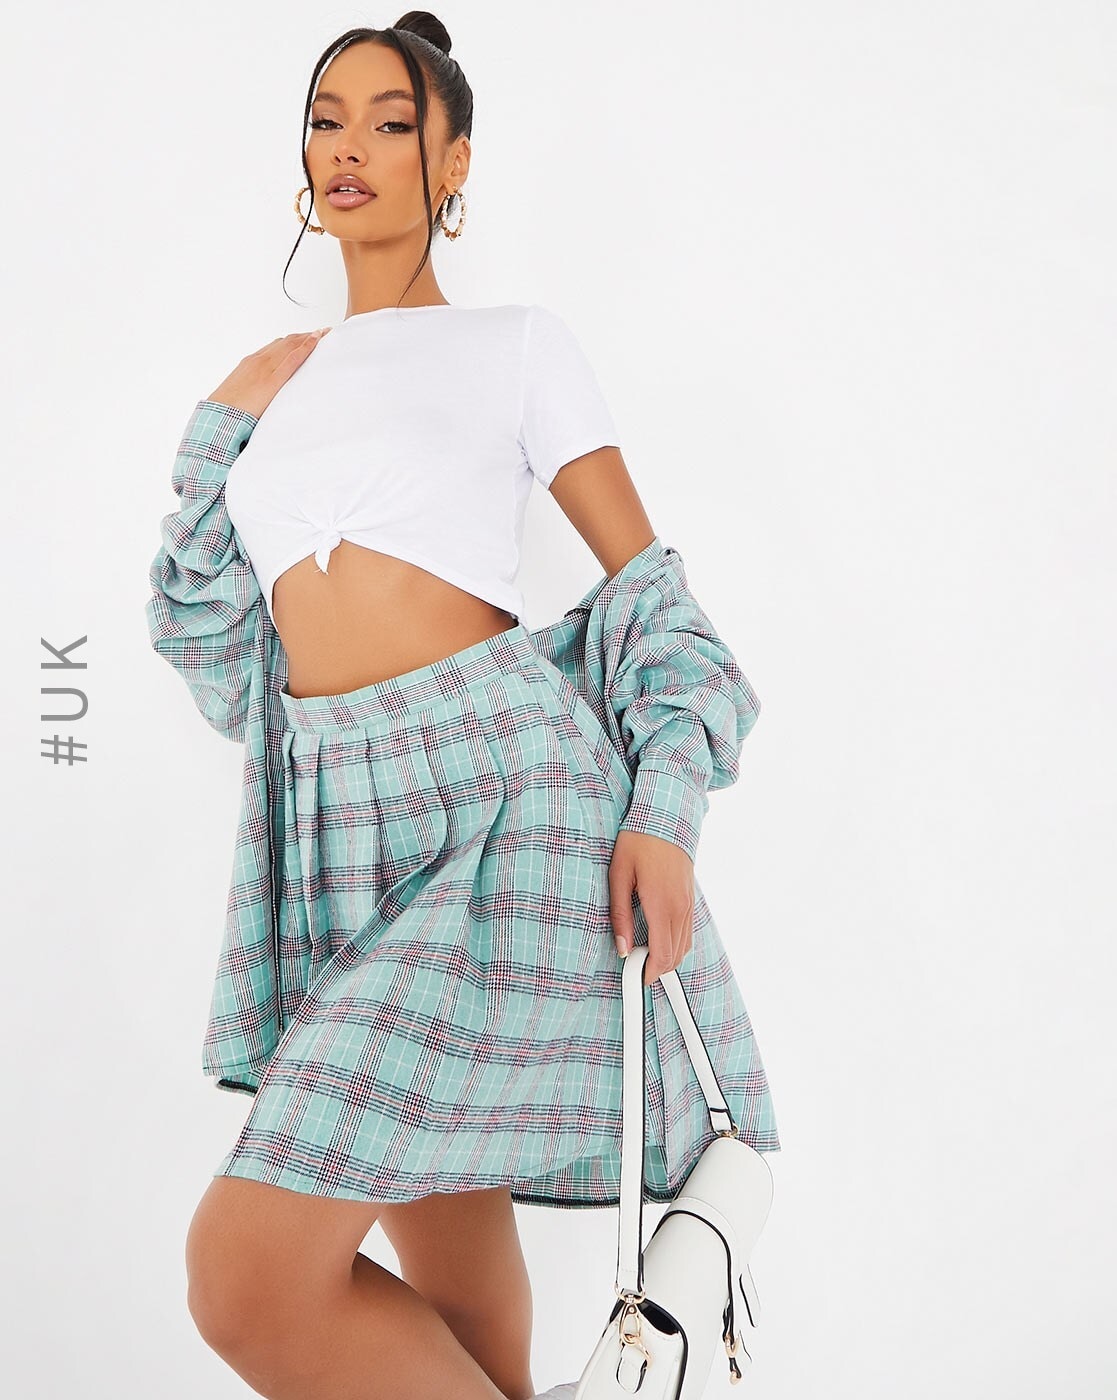 Shop Pleated Plaid Mini Skirt for Women from latest collection at Forever  21  402175